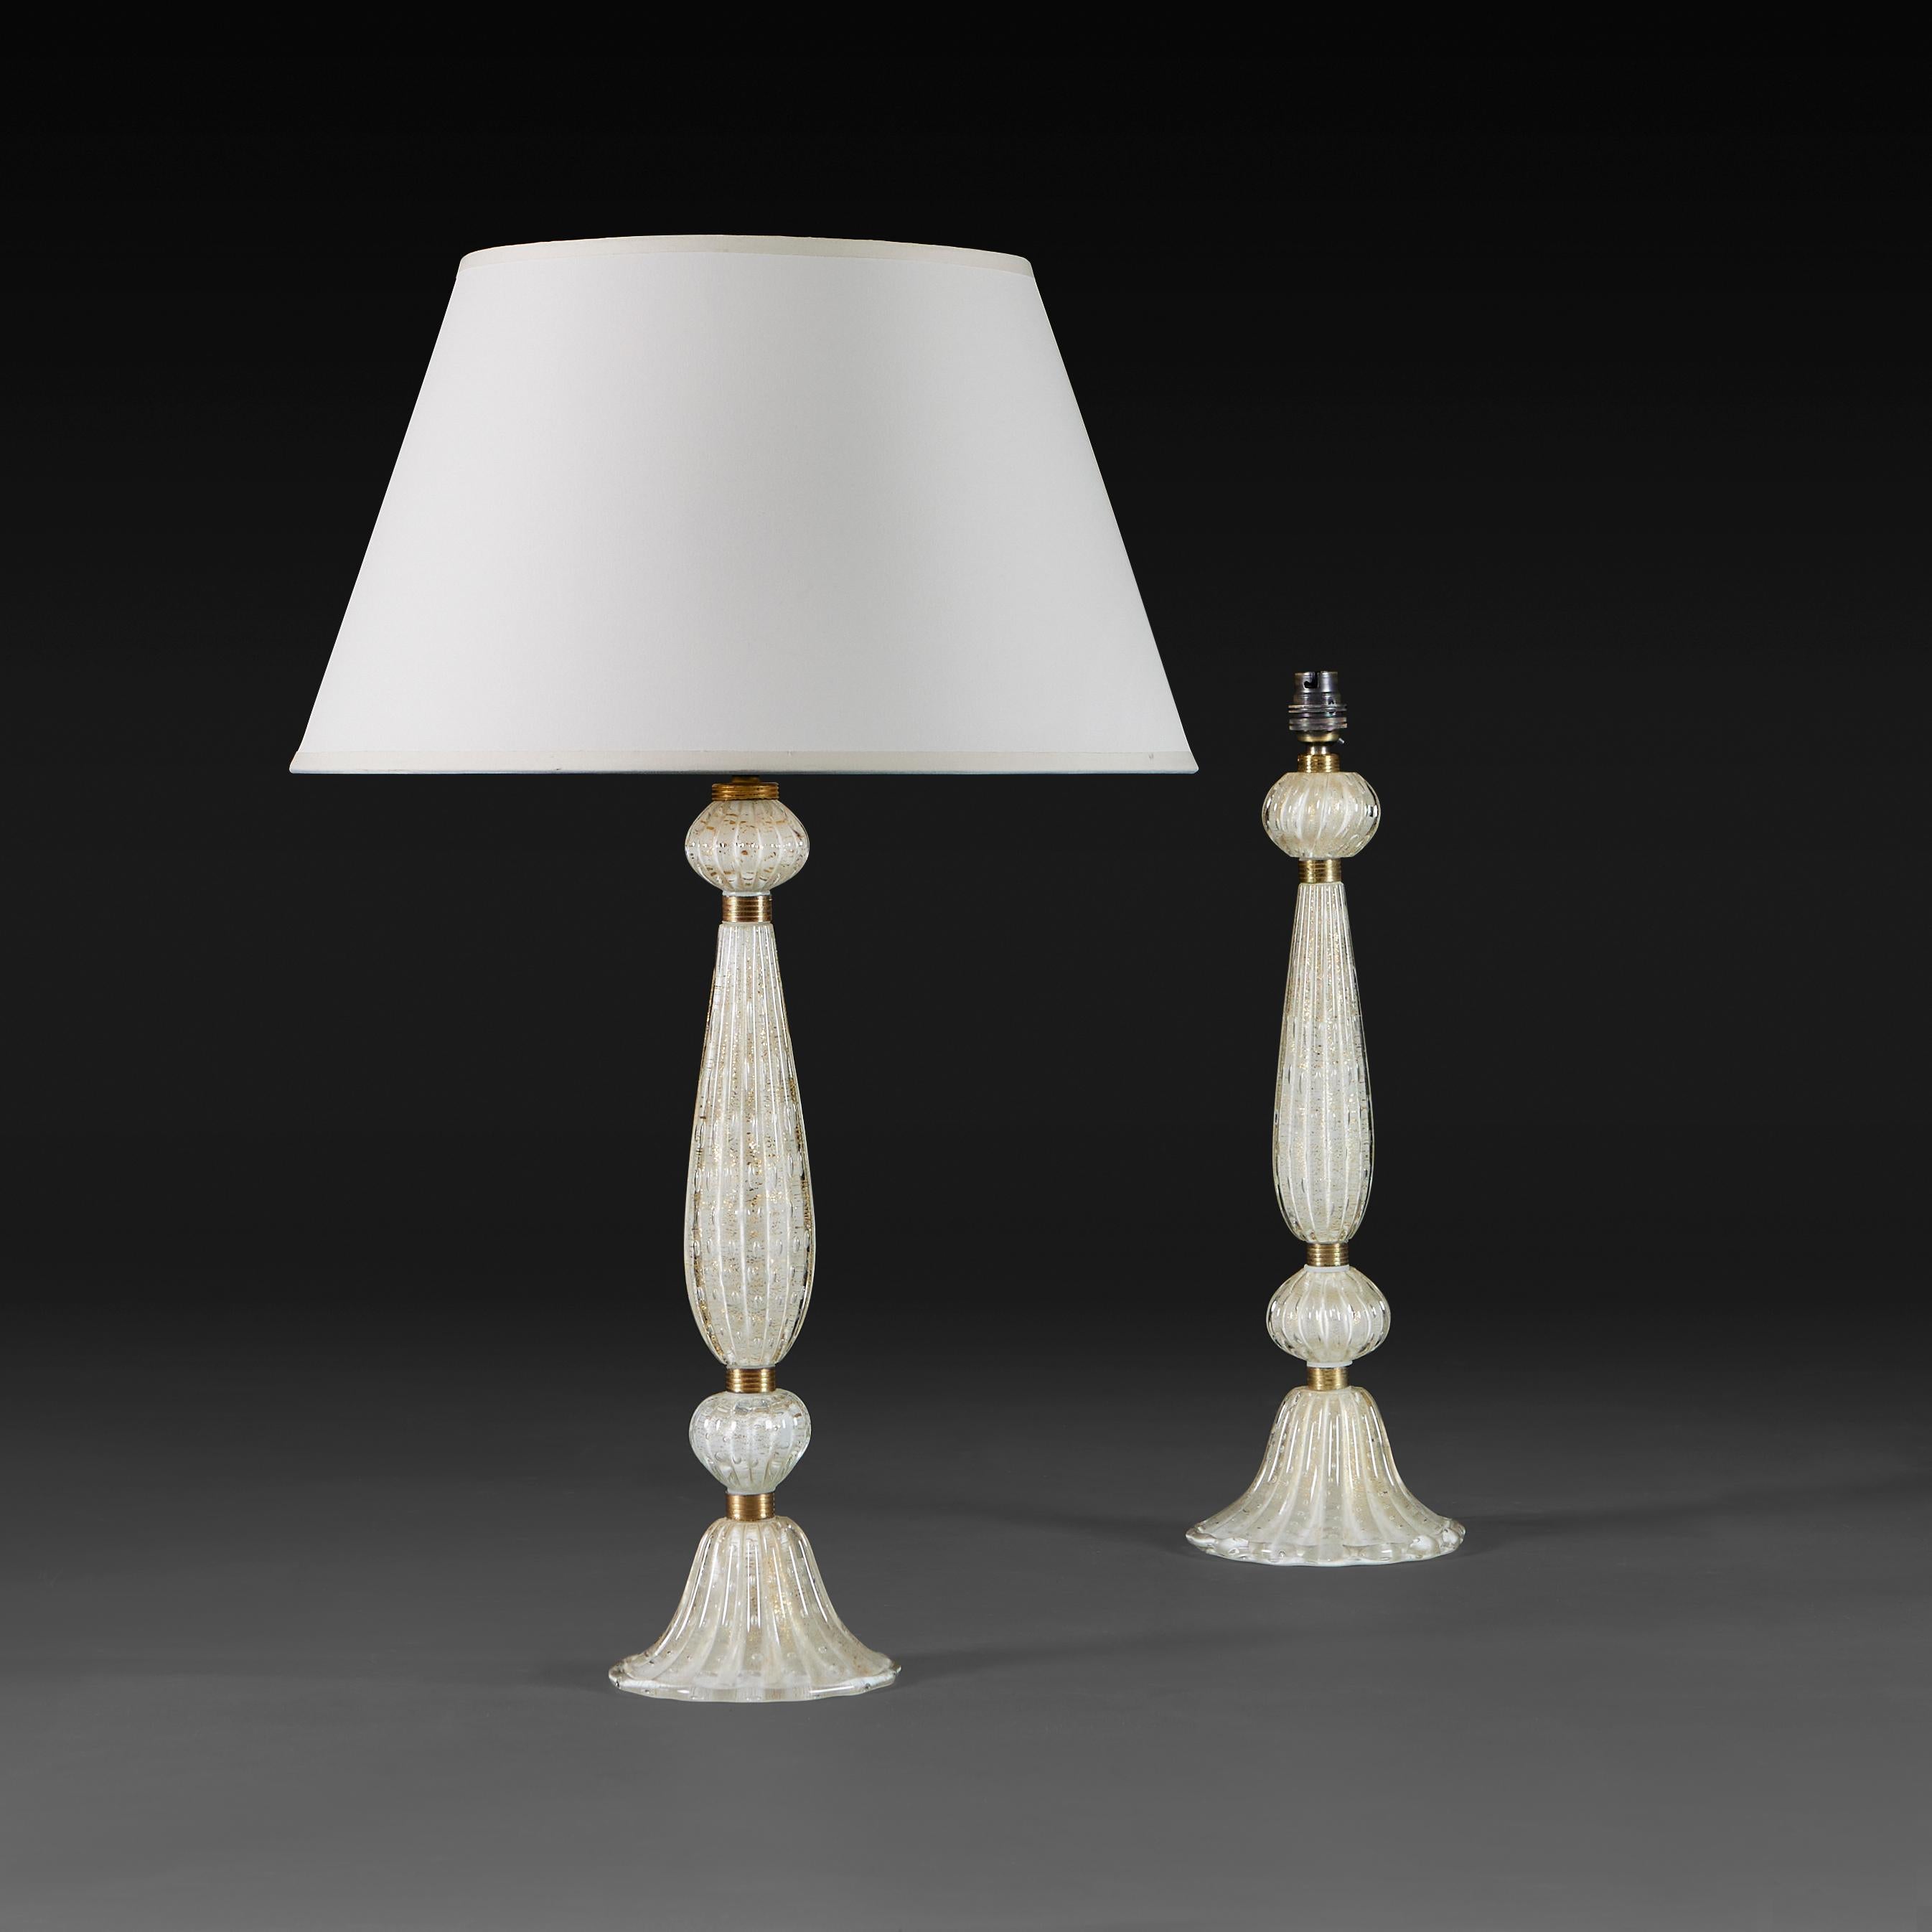 Italy, circa 1950

A pair of Barovier & Toso Murano glass fluted baluster lamps, blown in segments with bullicante bubbles and gold inclusions, fastened with brass bands. 

Height 42.00cm
Diameter of base 14.00cm

Currently wired for the UK with